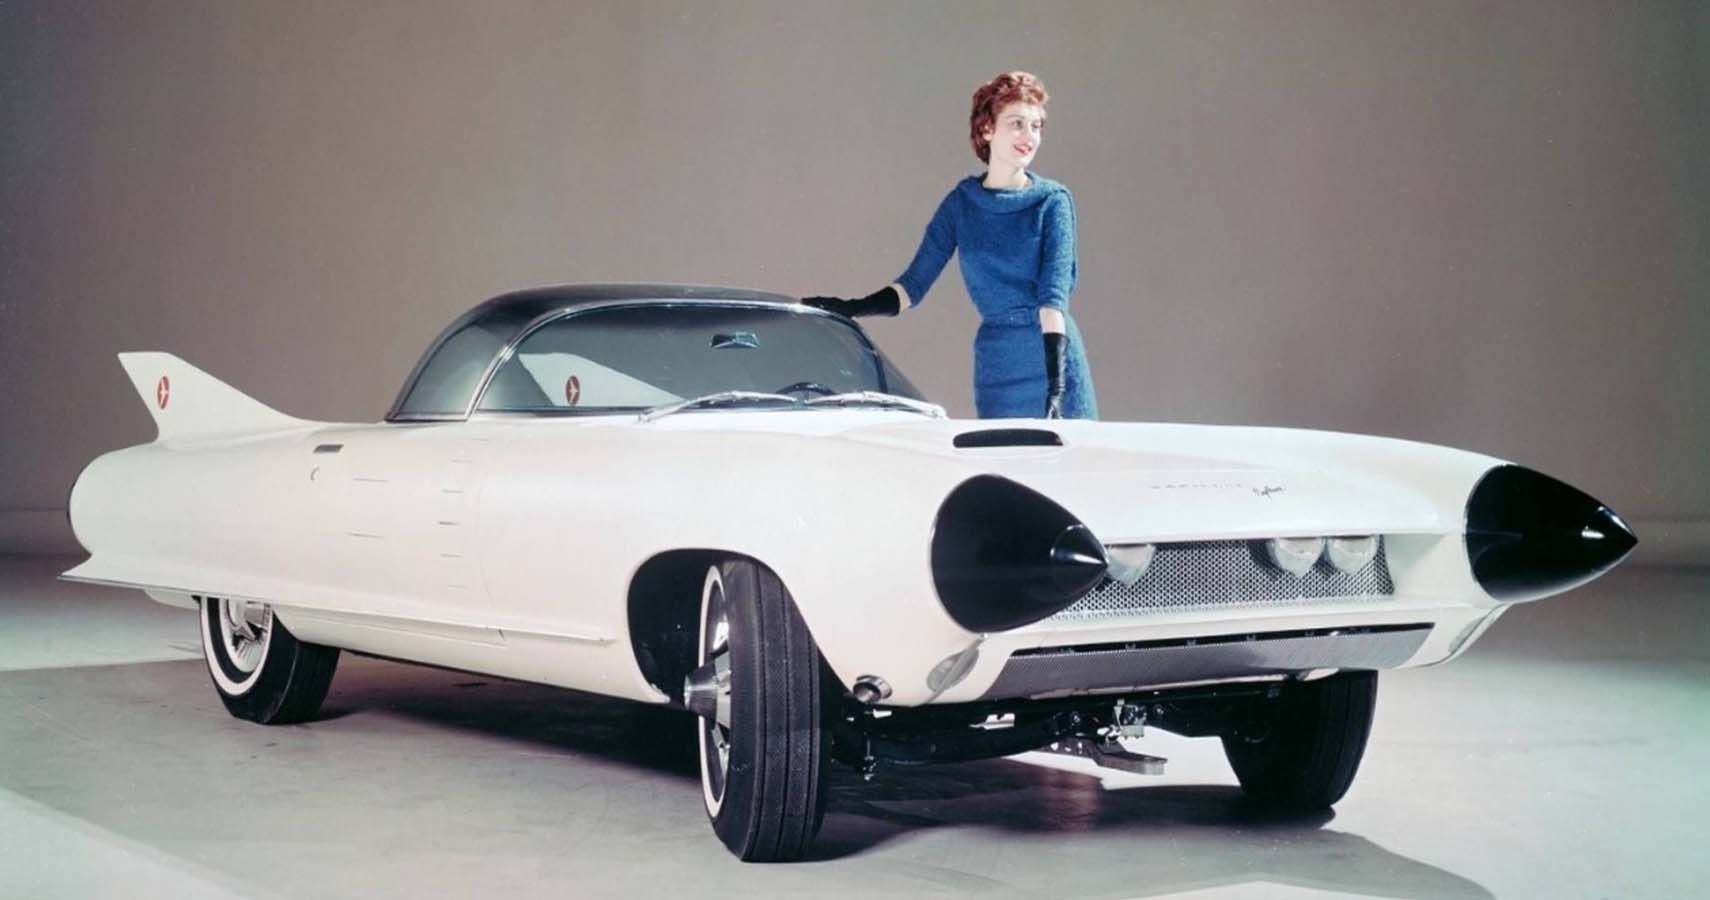 The Jetson-Like Appearance Of The 1959 Cadillac Cyclone Concept Car